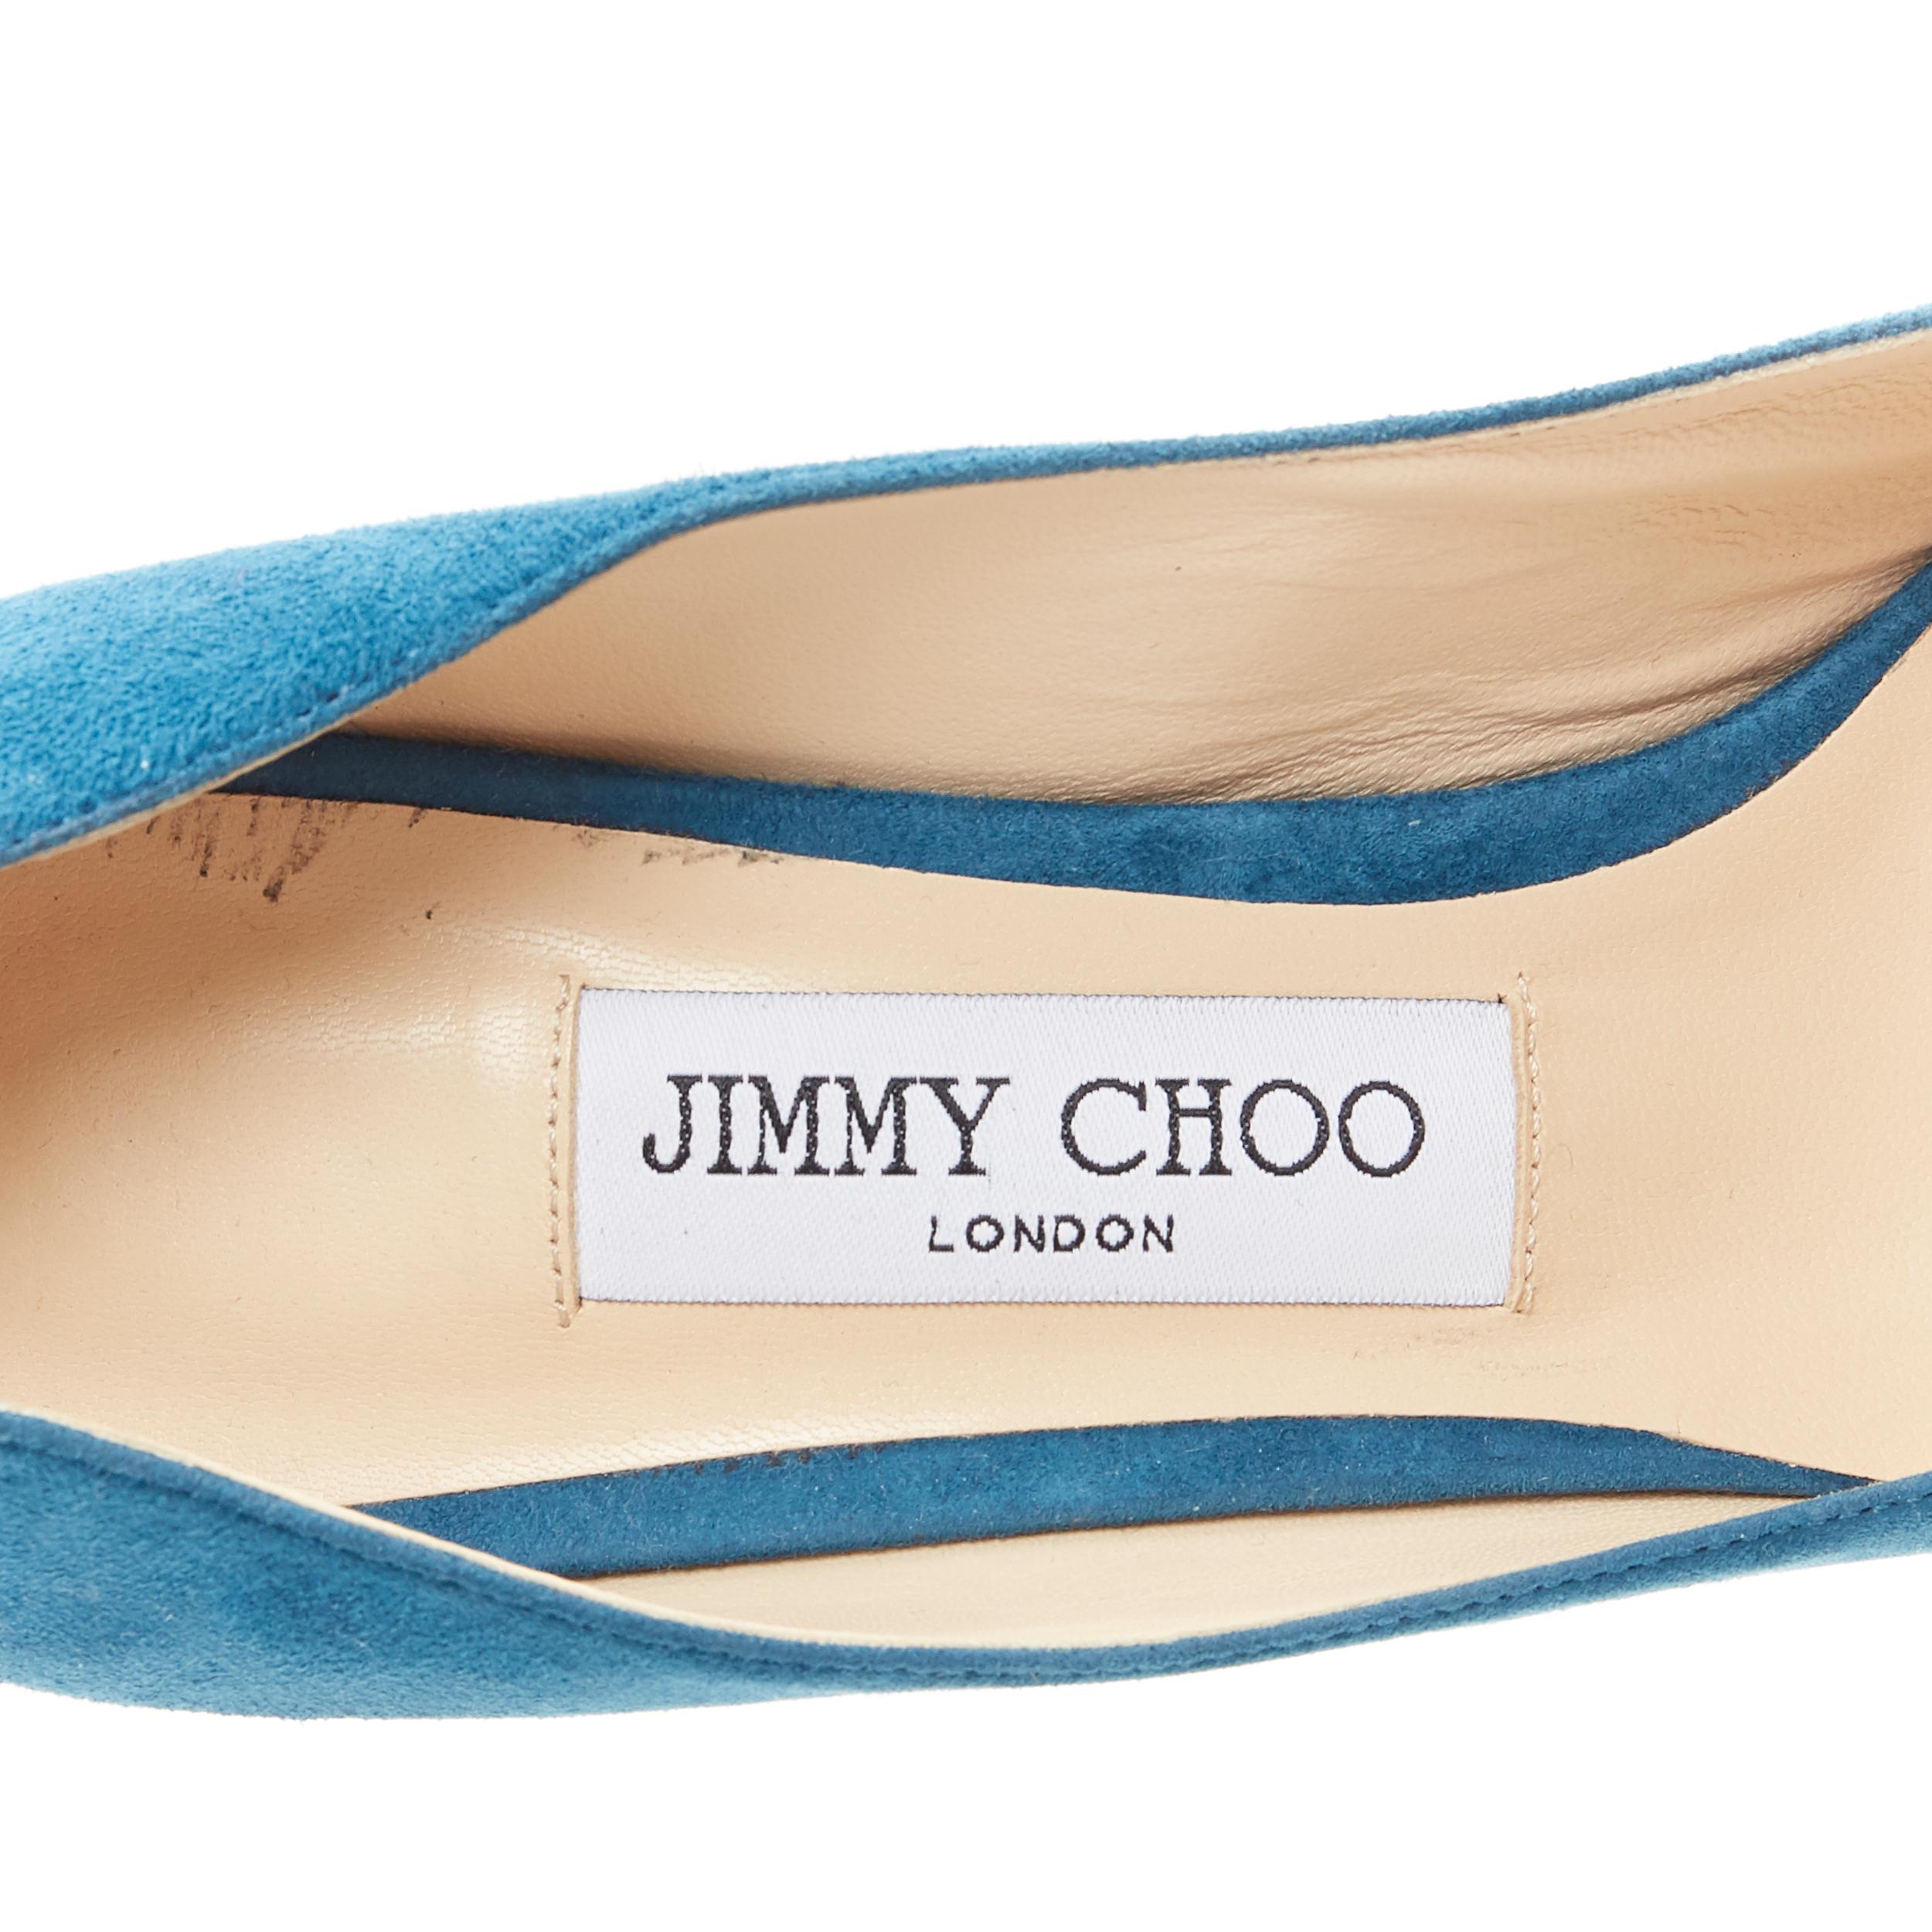 JIMMY CHOO Romy 85 teal blue suede leather point toe pigalle pump EU37 4